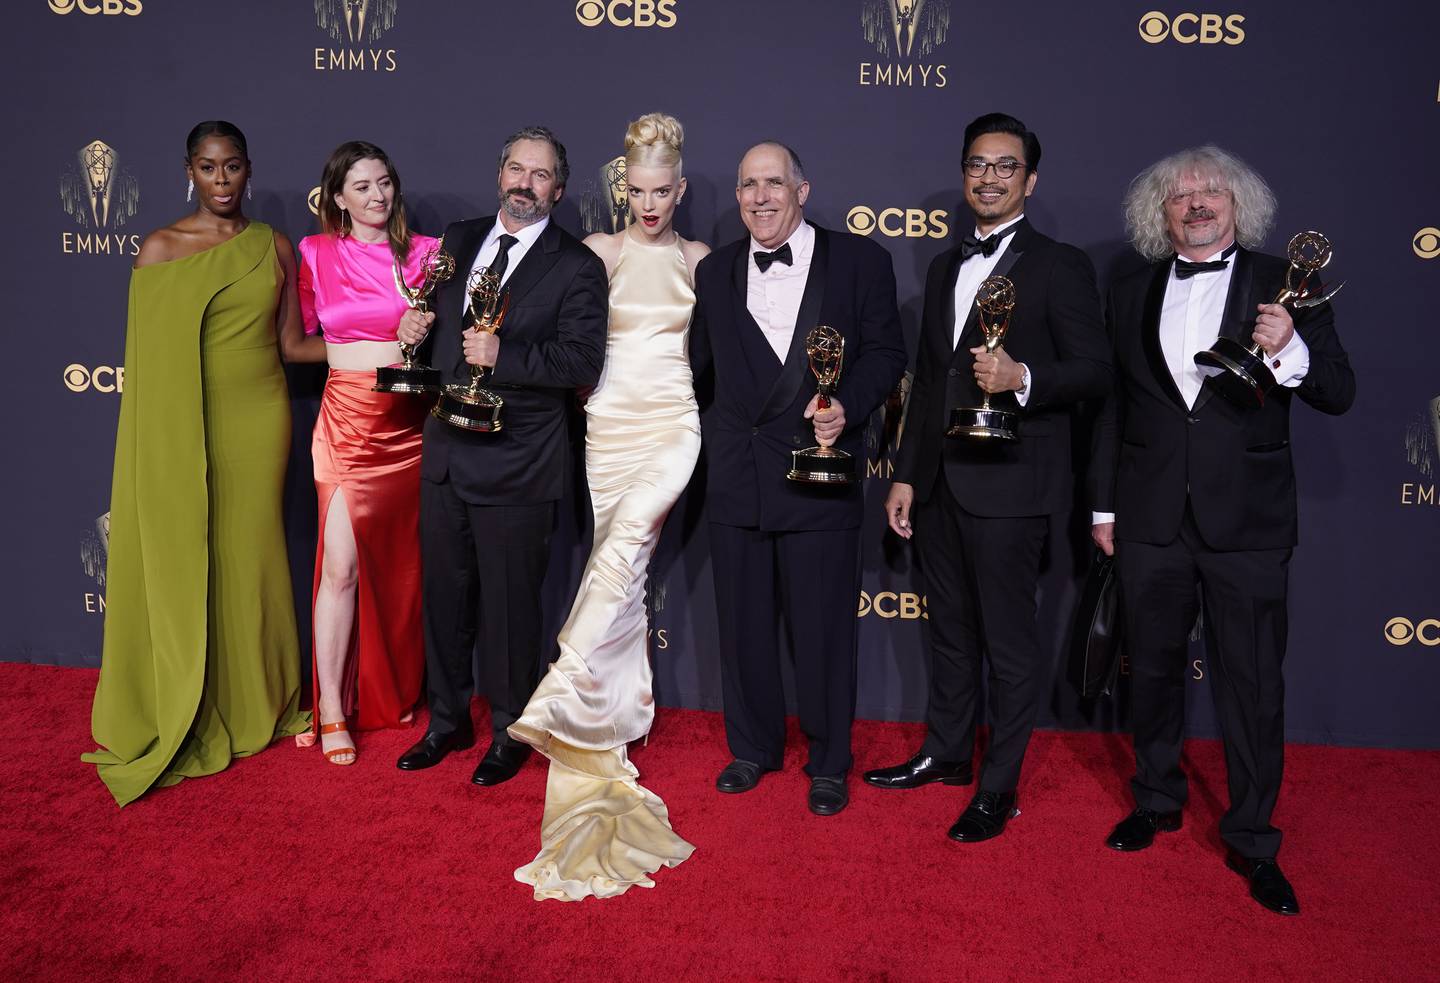 From left: Moses Ingram, Marielle Heller, Scott Frank, Anya Taylor-Joy, William Horberg, Mick Aniceto and Marcus Loges, winners of the award for Outstanding Directing for a Limited or Anthology Series or Movie, for 'The Queen's Gambit'. AP